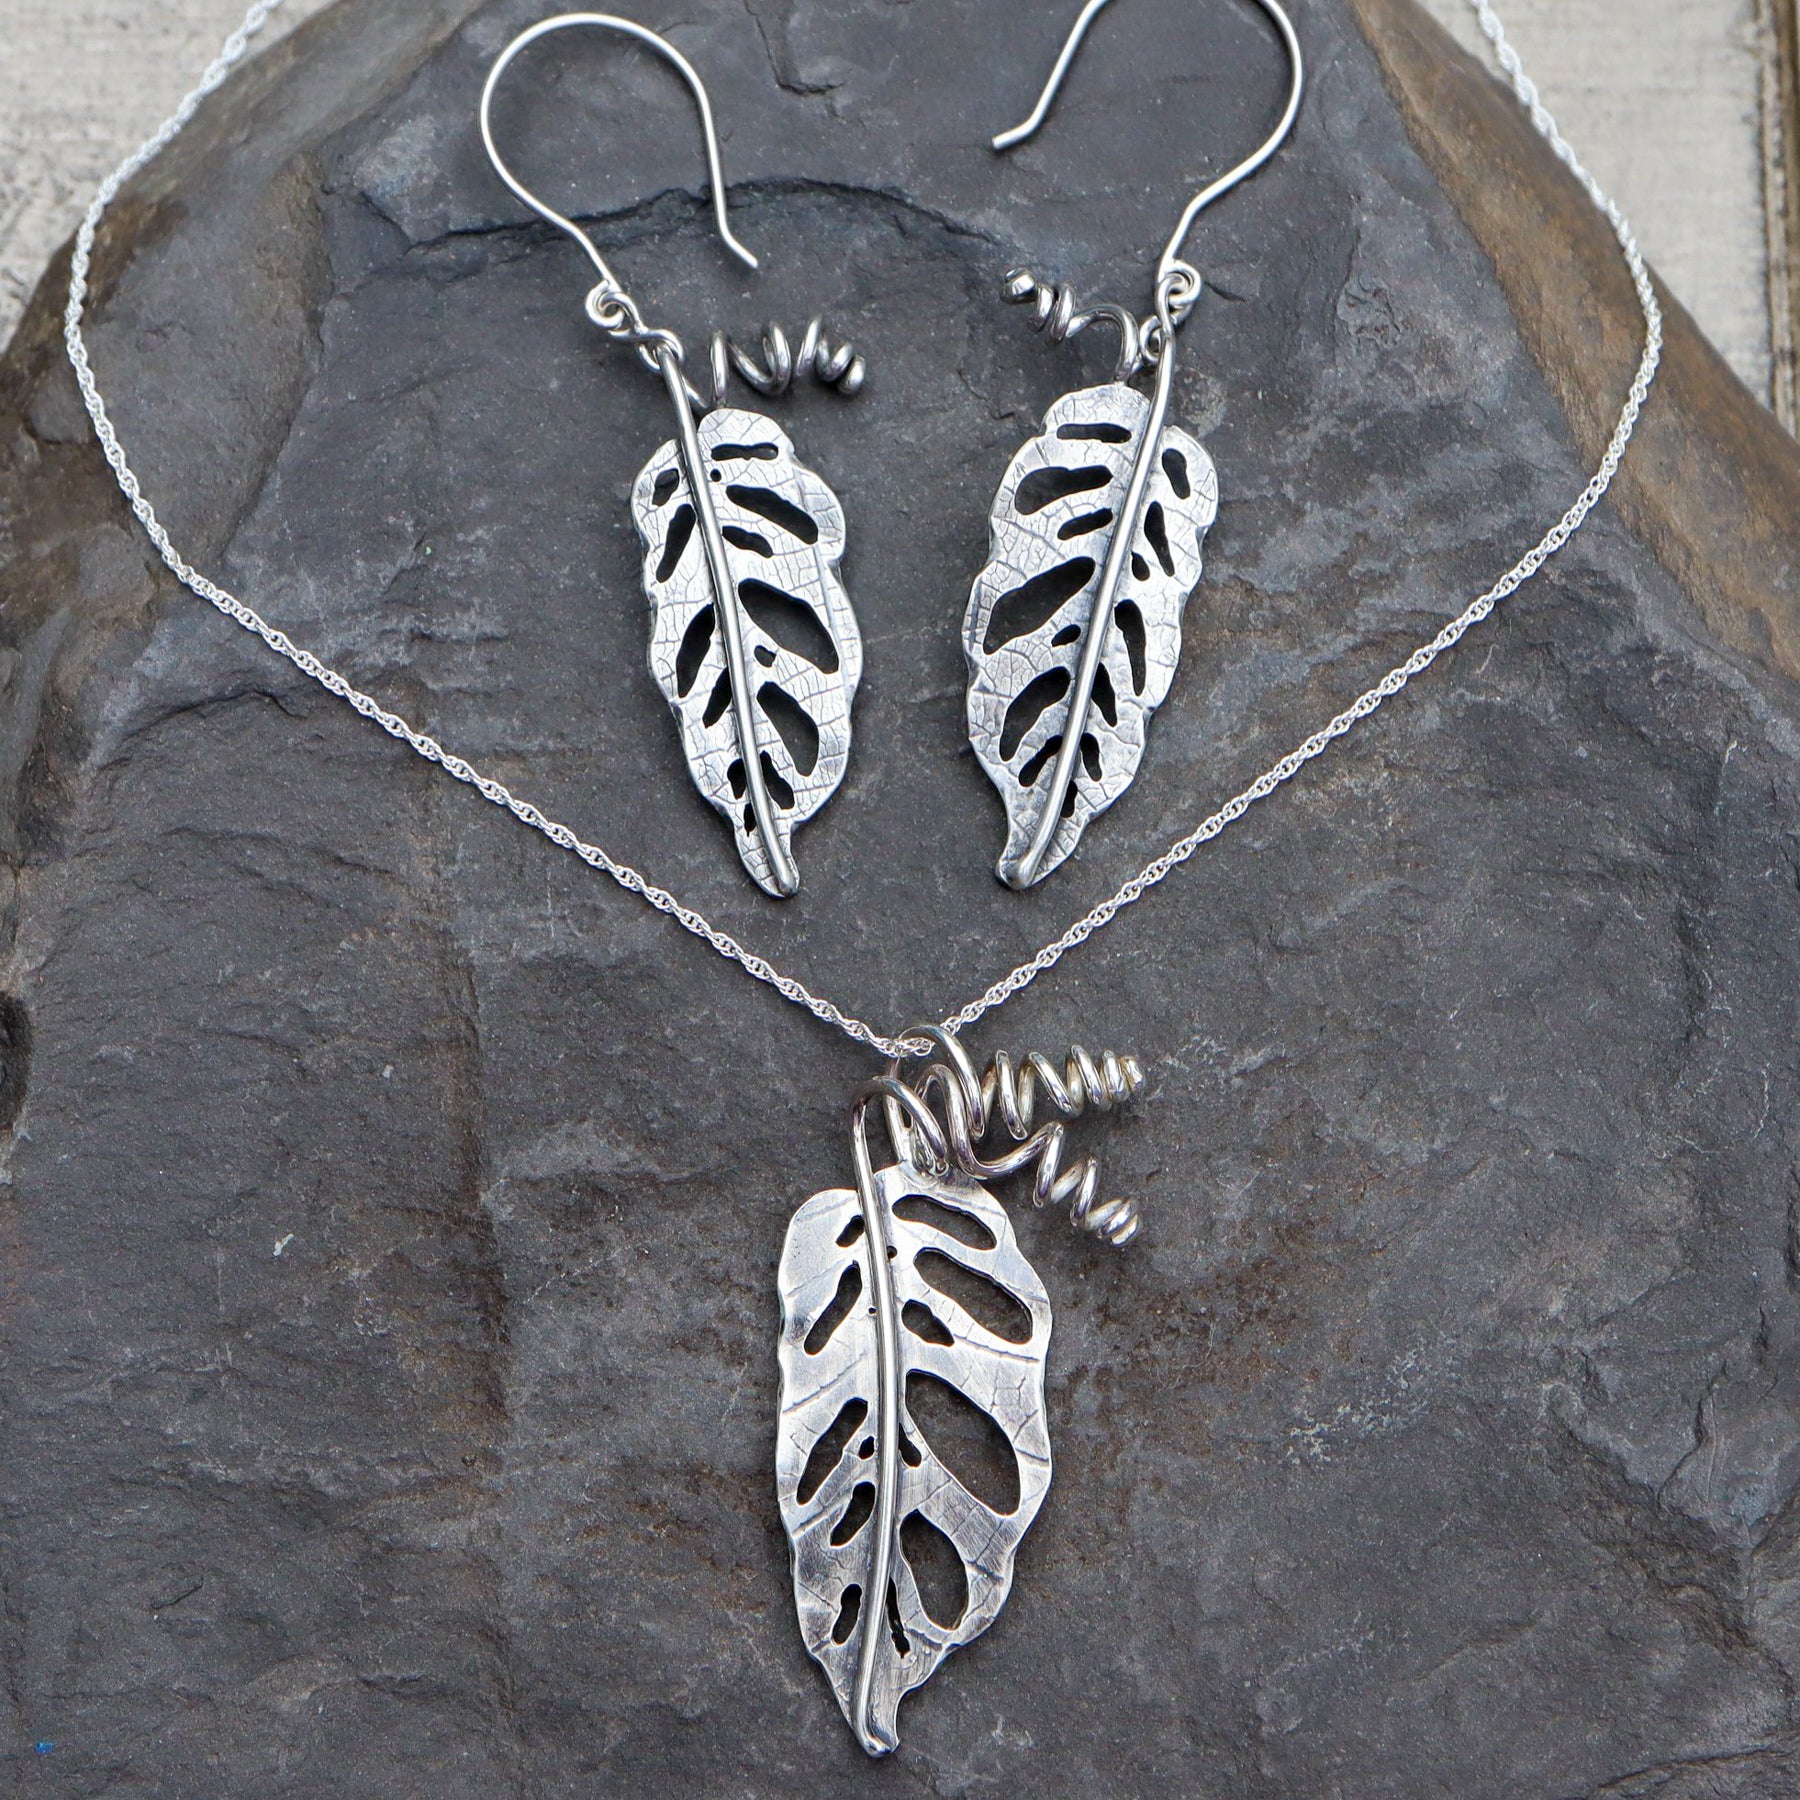 Monstera adansonii earrings and a necklace set that come together. The necklace leaf is about 1.5 inches tall and the earrings are a little smaller. They are shown on a dark grey piece of slate. 